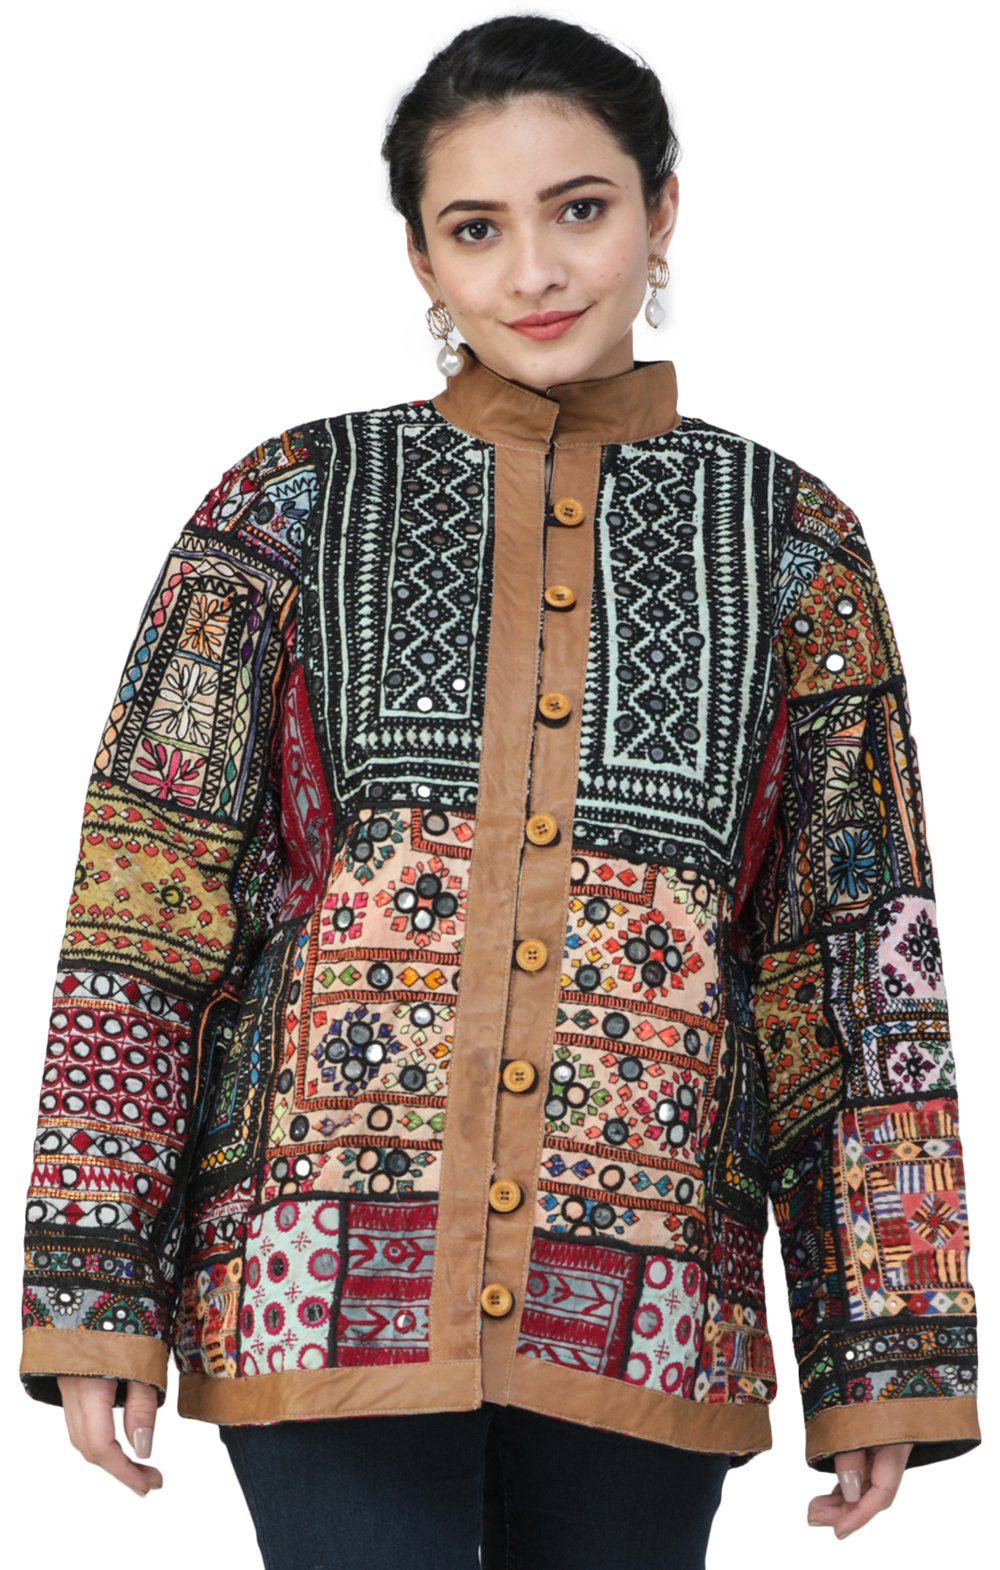 Multicolored Jacket from Kutch with Hand-Embroidered Patchworks and Leather  Trims | Exotic India Art